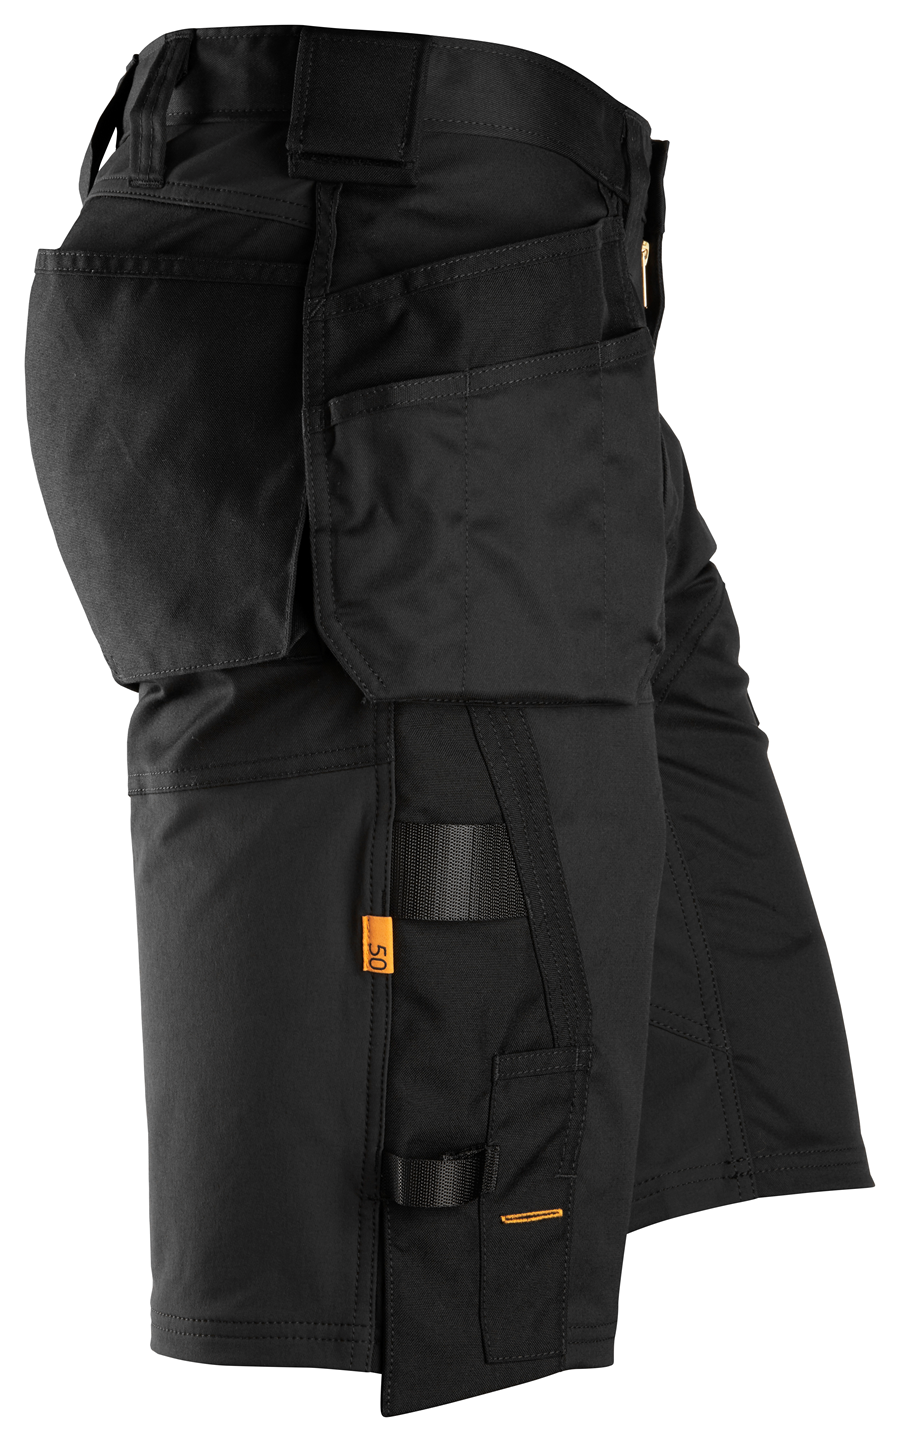 Snickers 6151 AllroundWork, Work PPE | Stretch Fit Uniforms A Z to Safety Centre Shorts - Pockets | Loose Holster